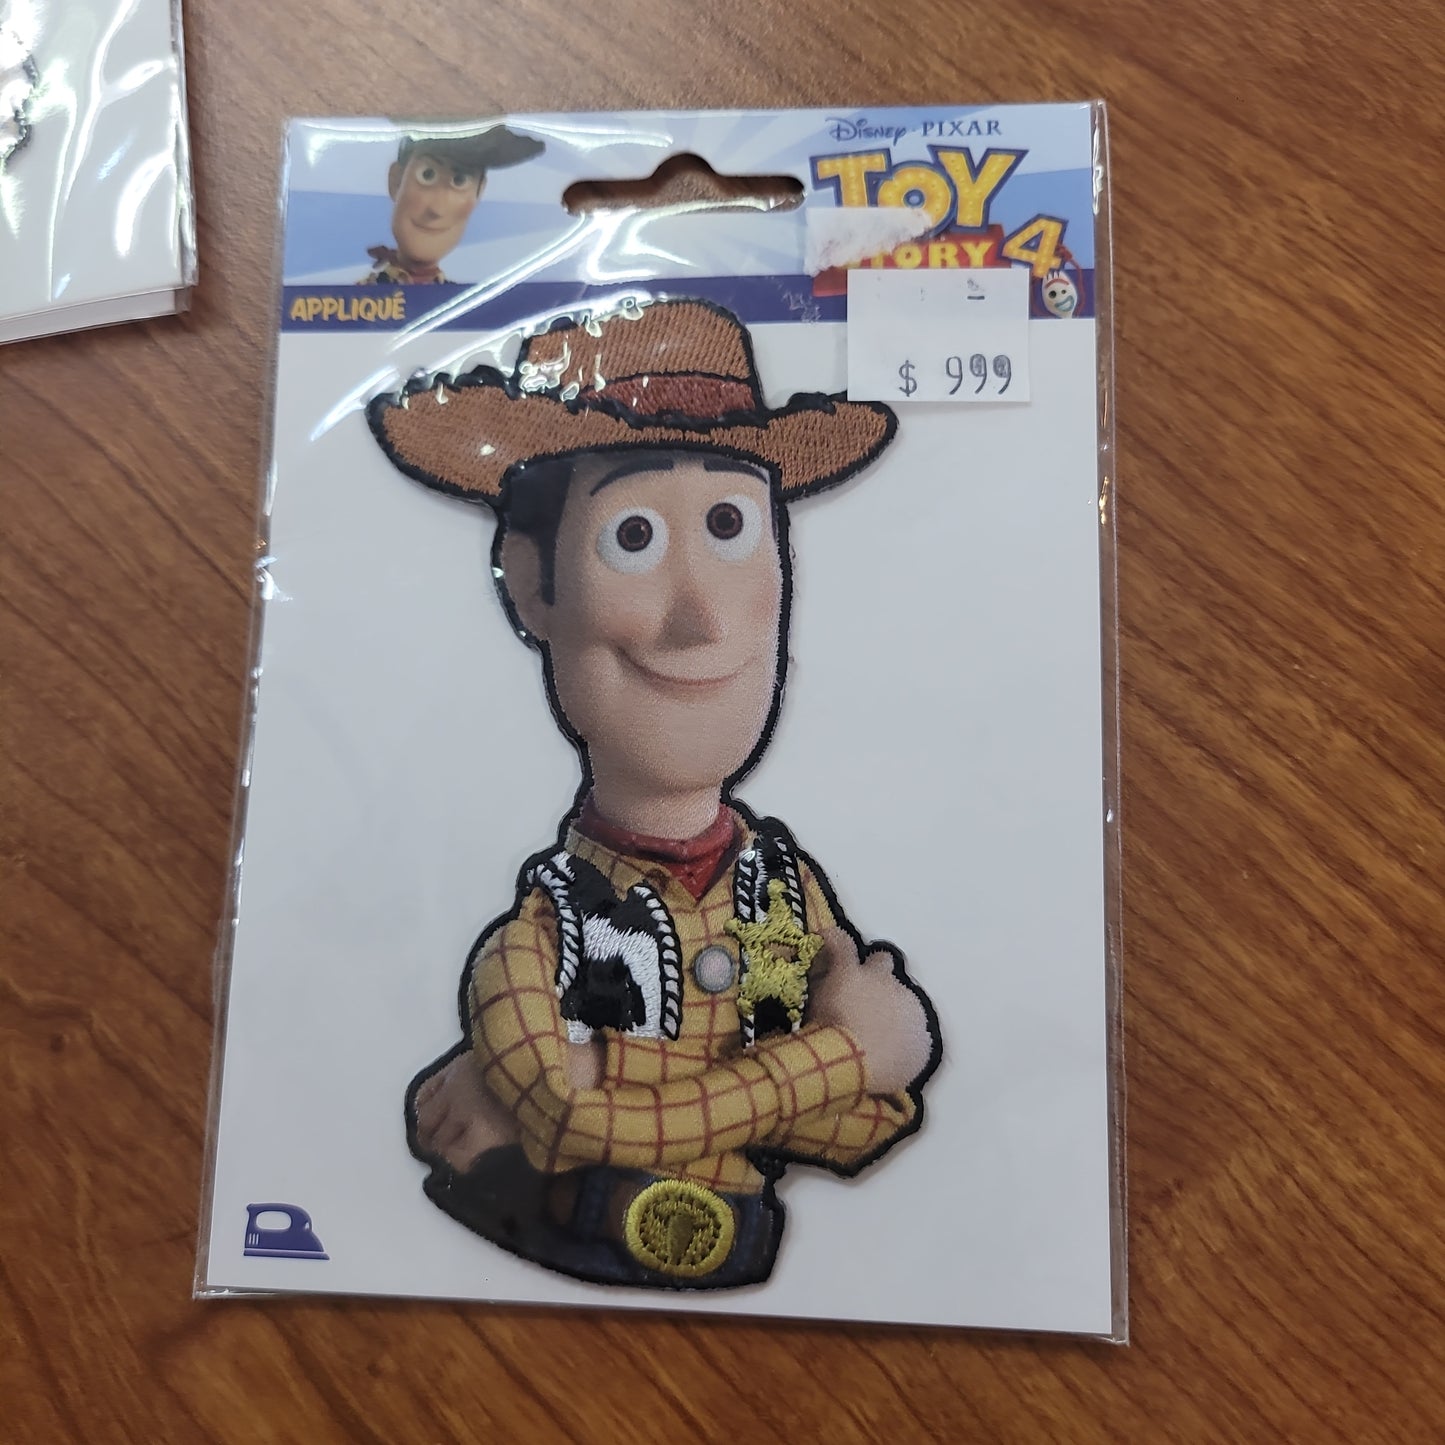 Toy story 4